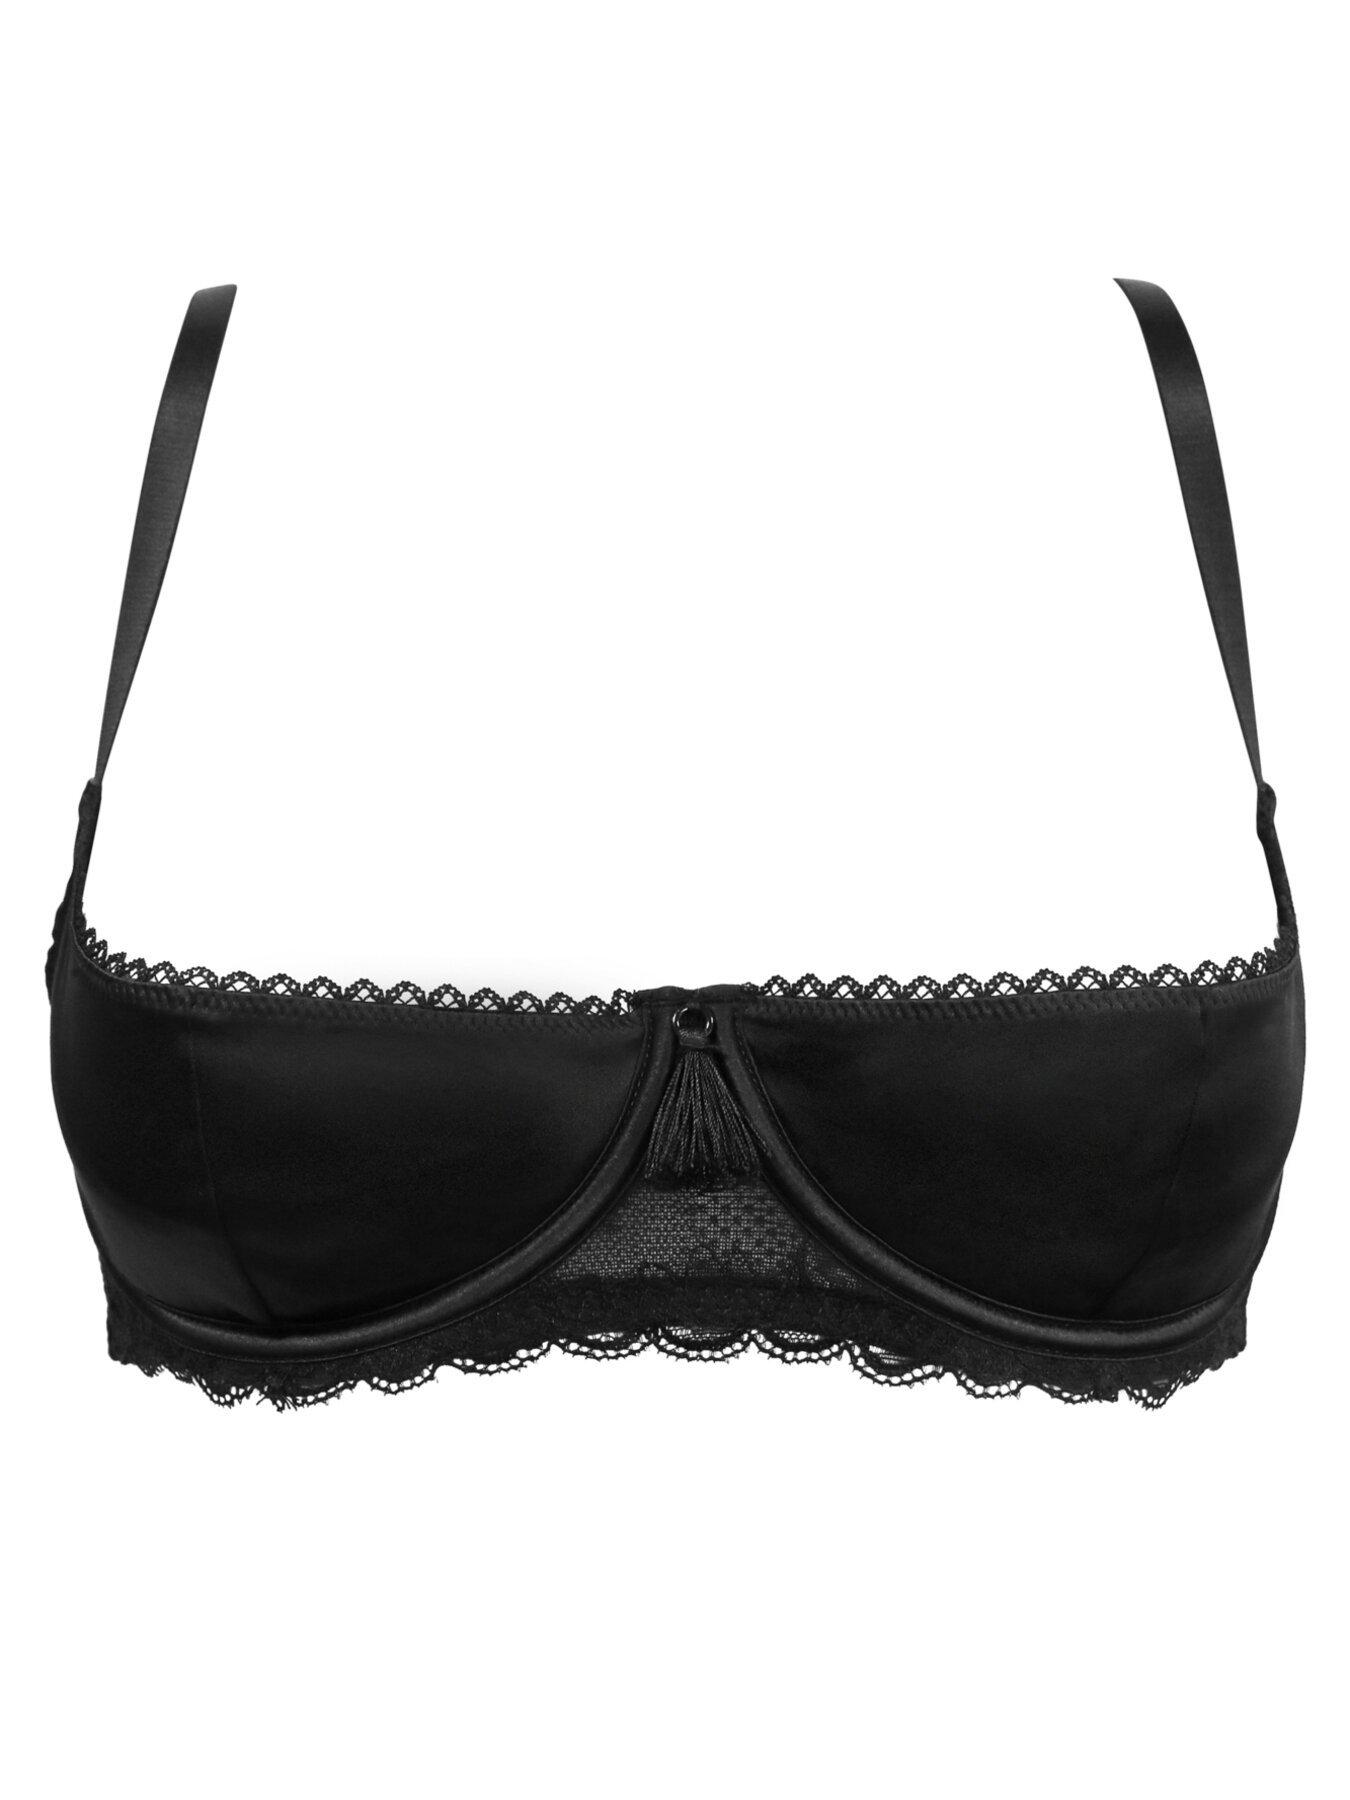 Eyelash Lace Open Front Cupless Quarter Cup Shelf Crotchless Bra